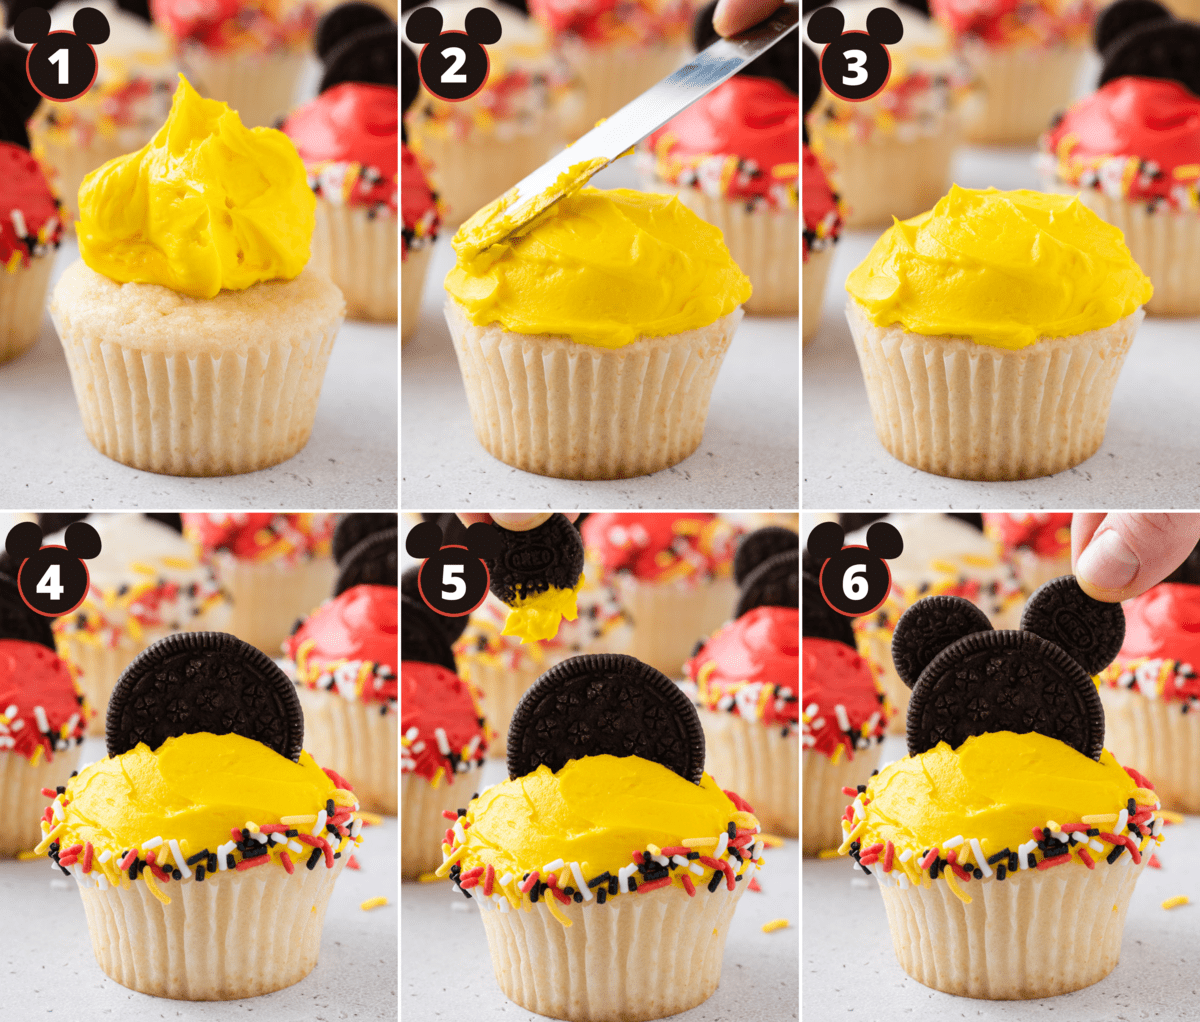 Step by step photos showing process of decorating Mickey Mouse cupcakes with Oreos